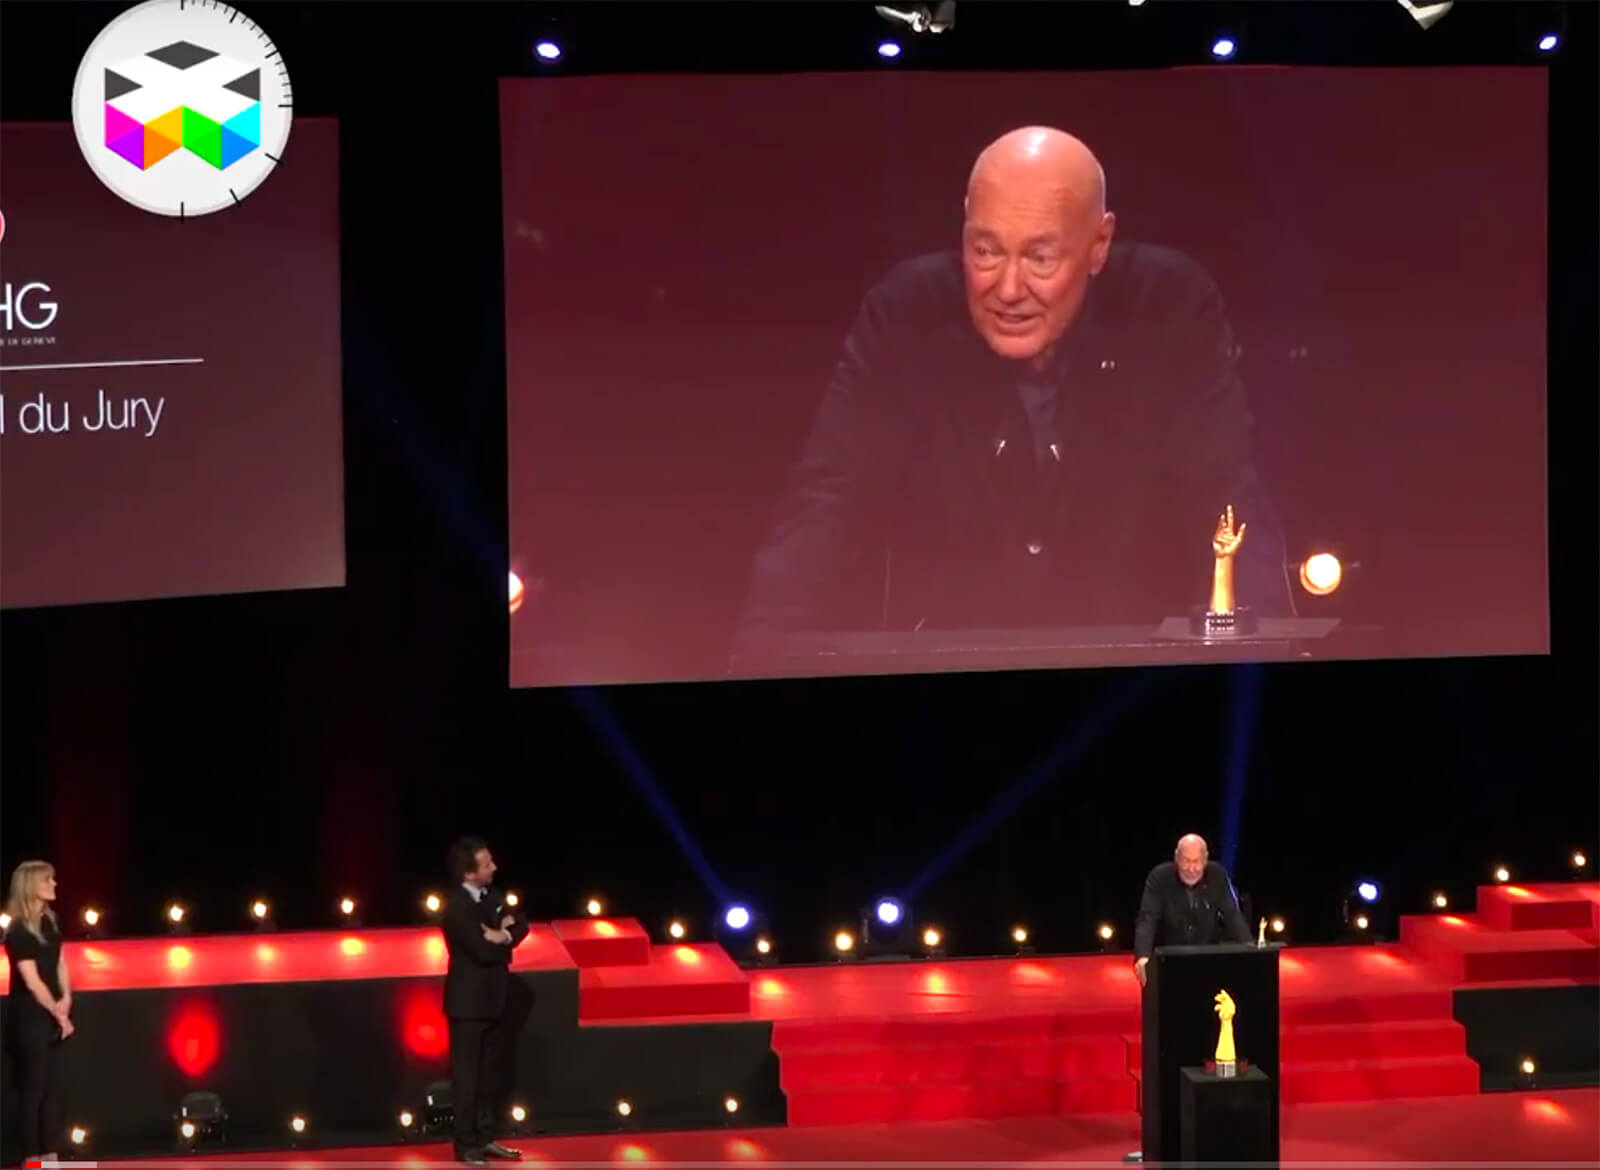 Jean-Claude Biver accepting the Special Jury award at the 2018 GPHG